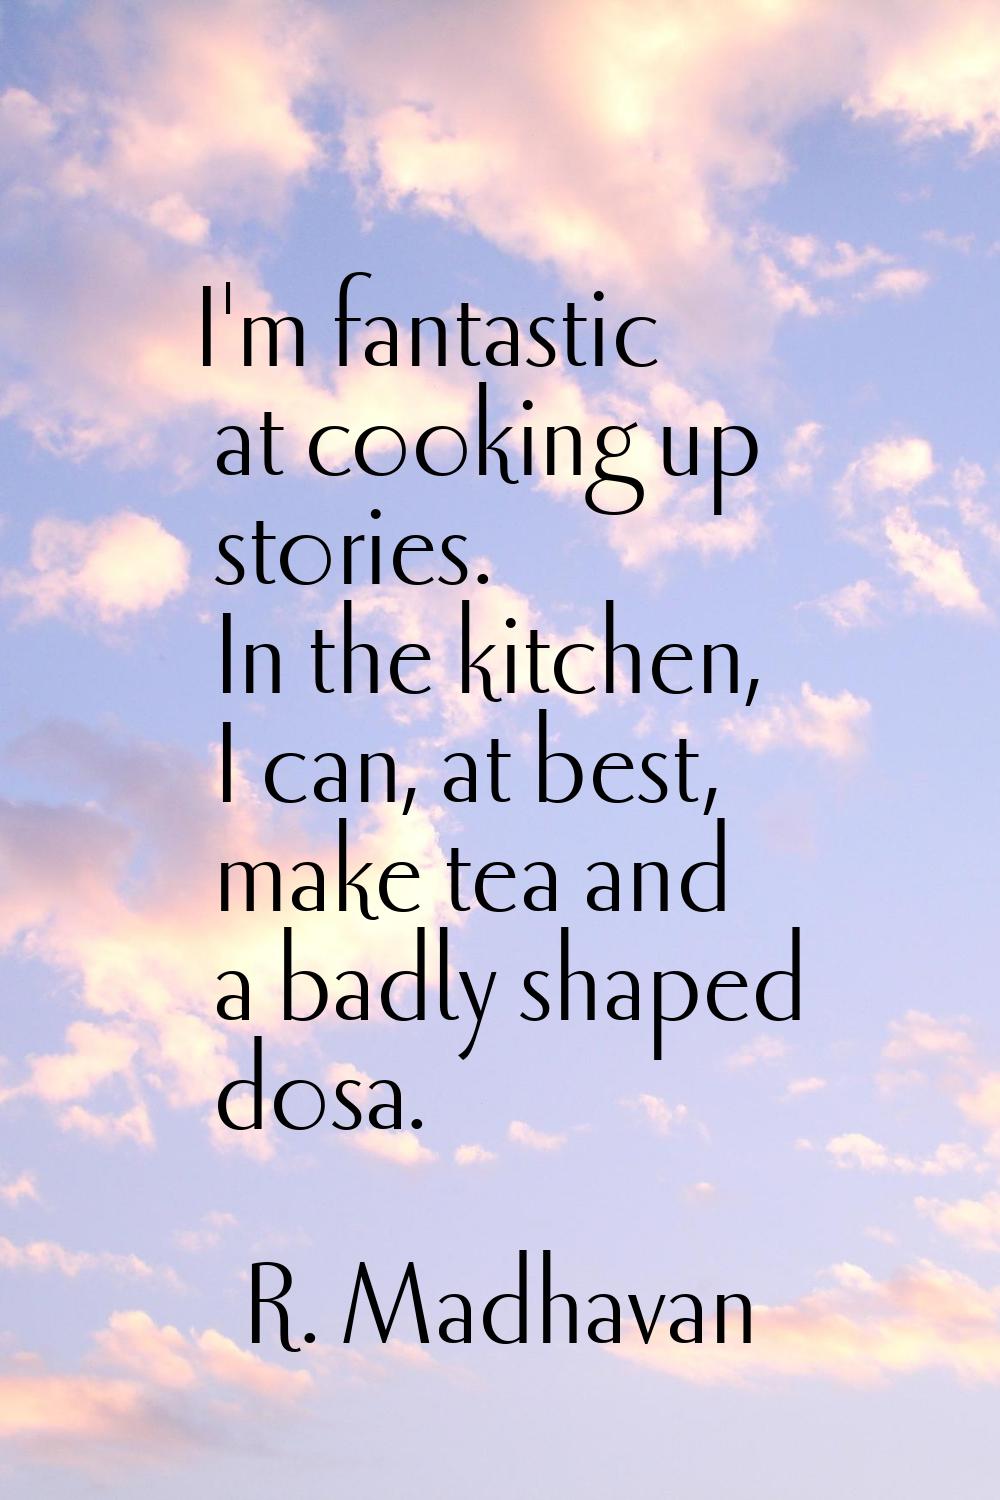 I'm fantastic at cooking up stories. In the kitchen, I can, at best, make tea and a badly shaped do